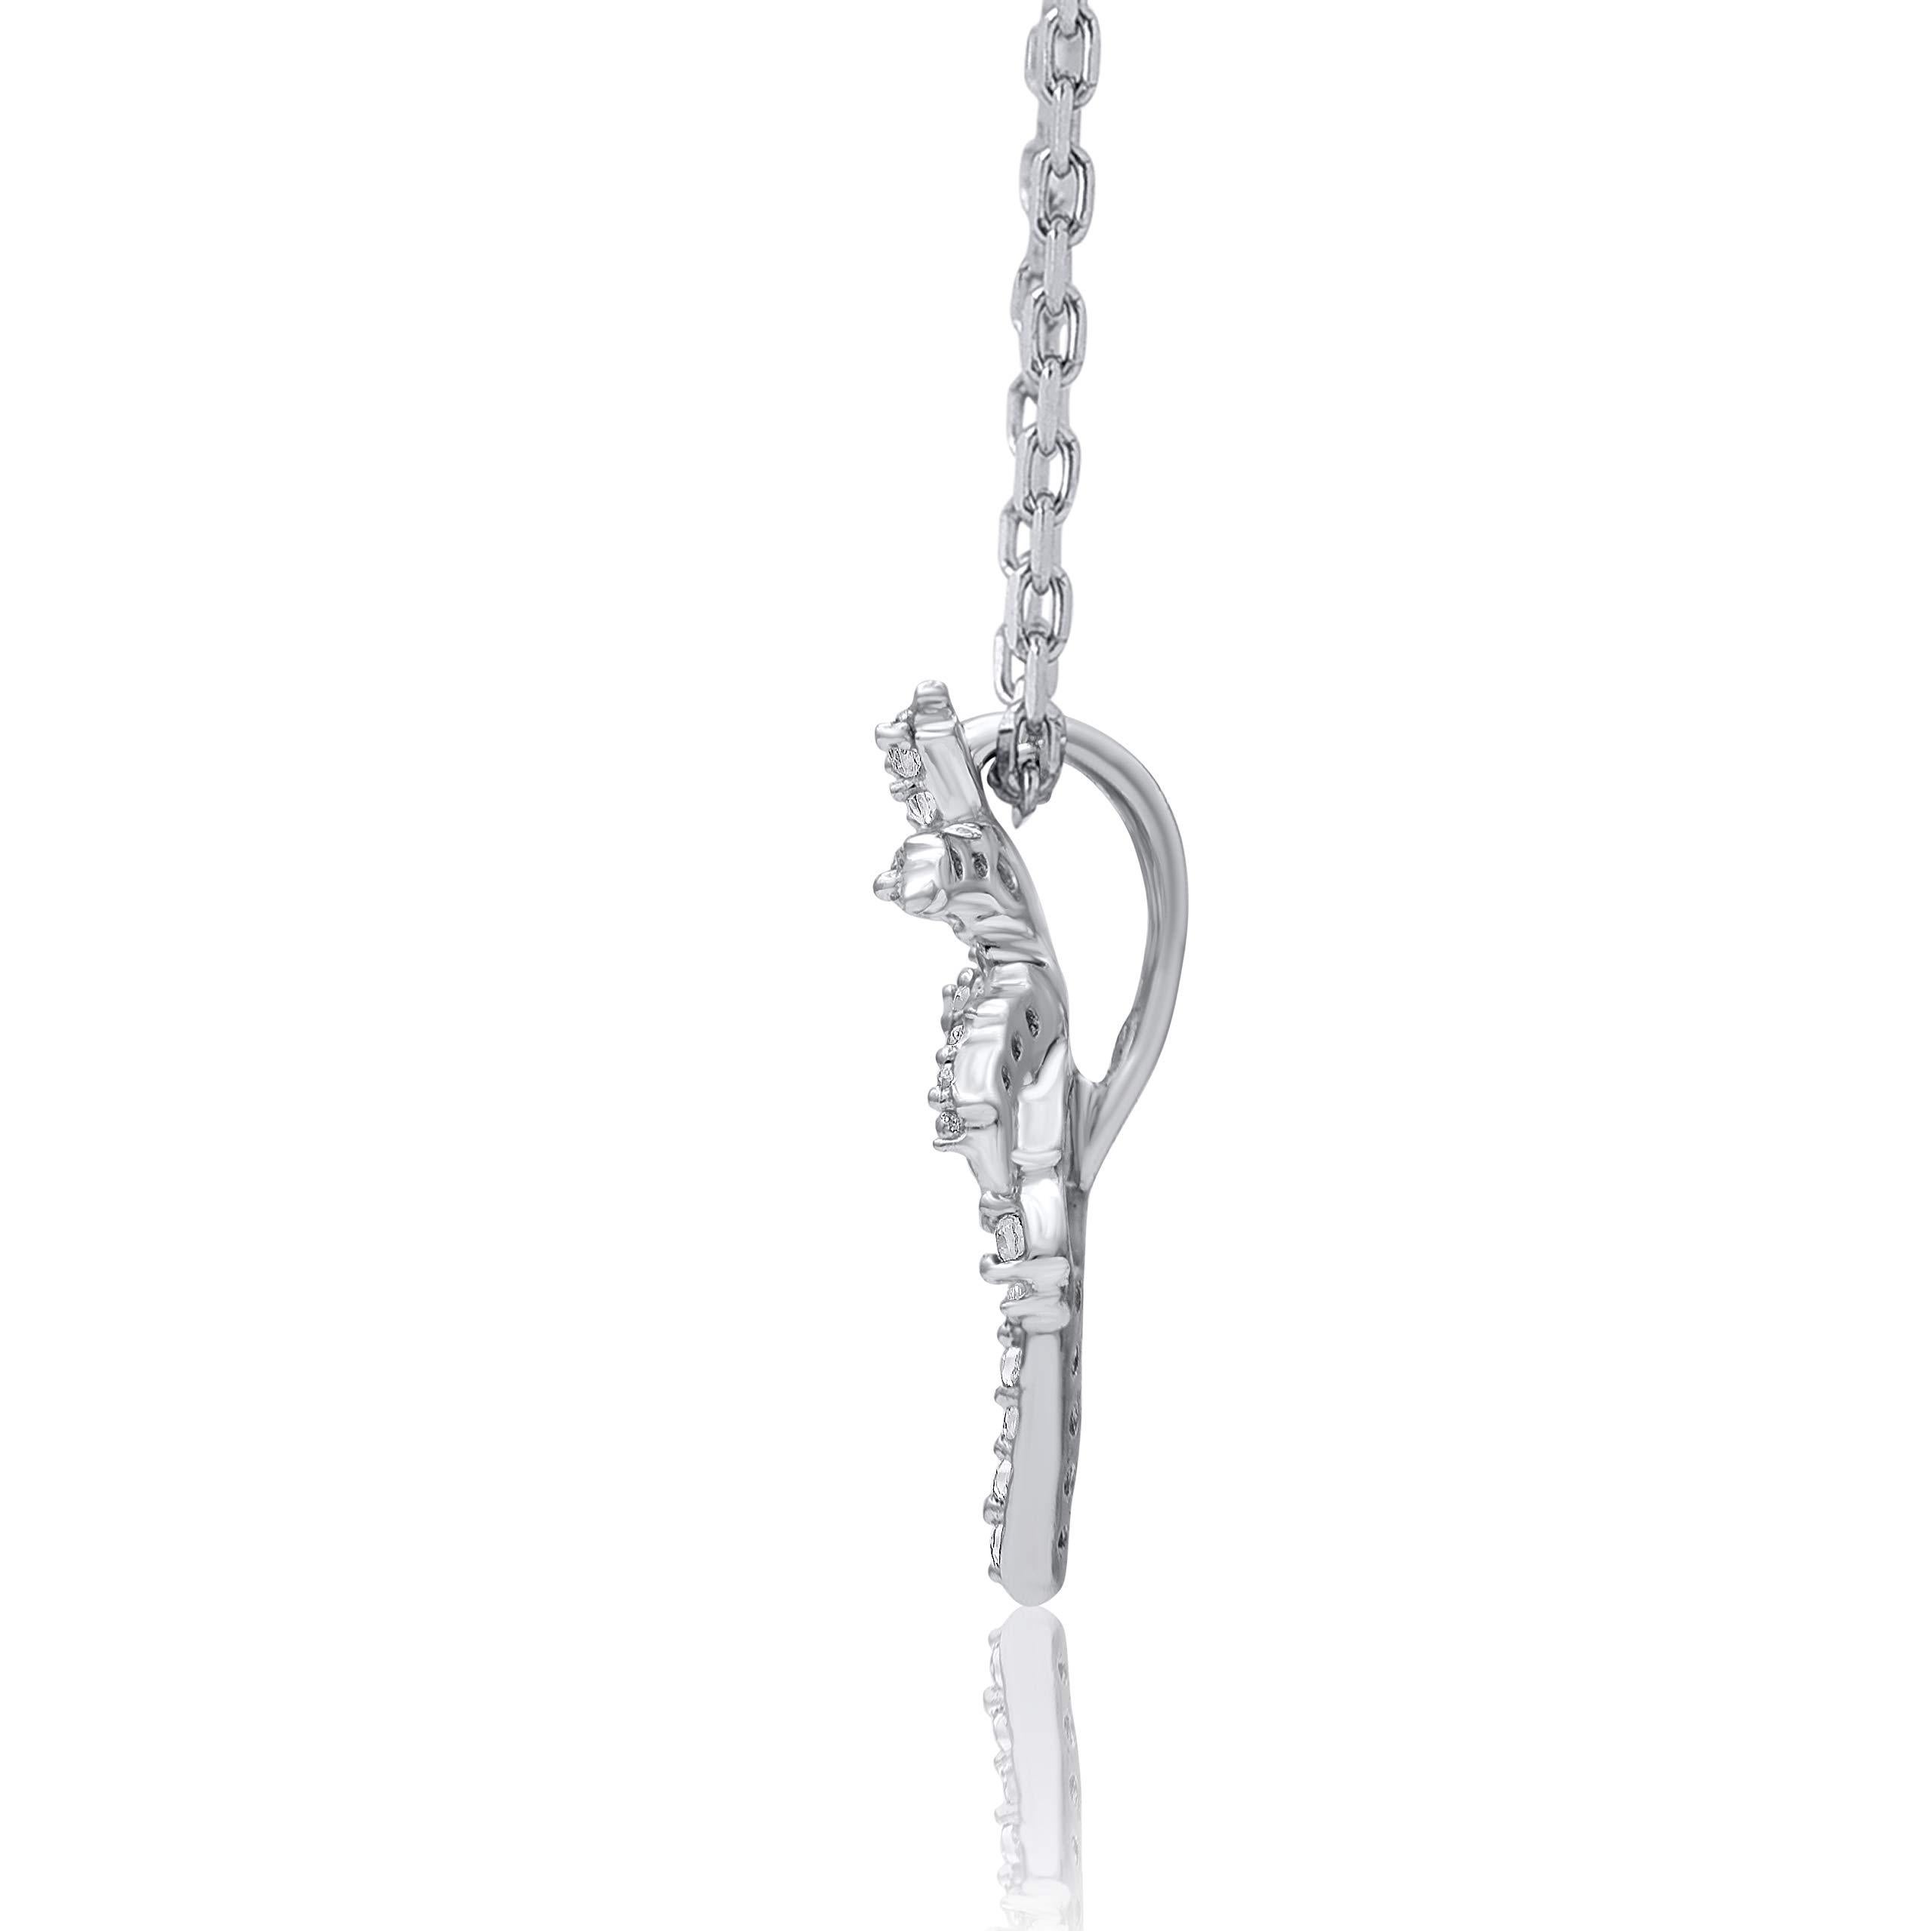 Single Cut TJD 0.08 Carat Natural Round Diamond 14KT White Gold Palm Tree Pendant Necklace For Sale